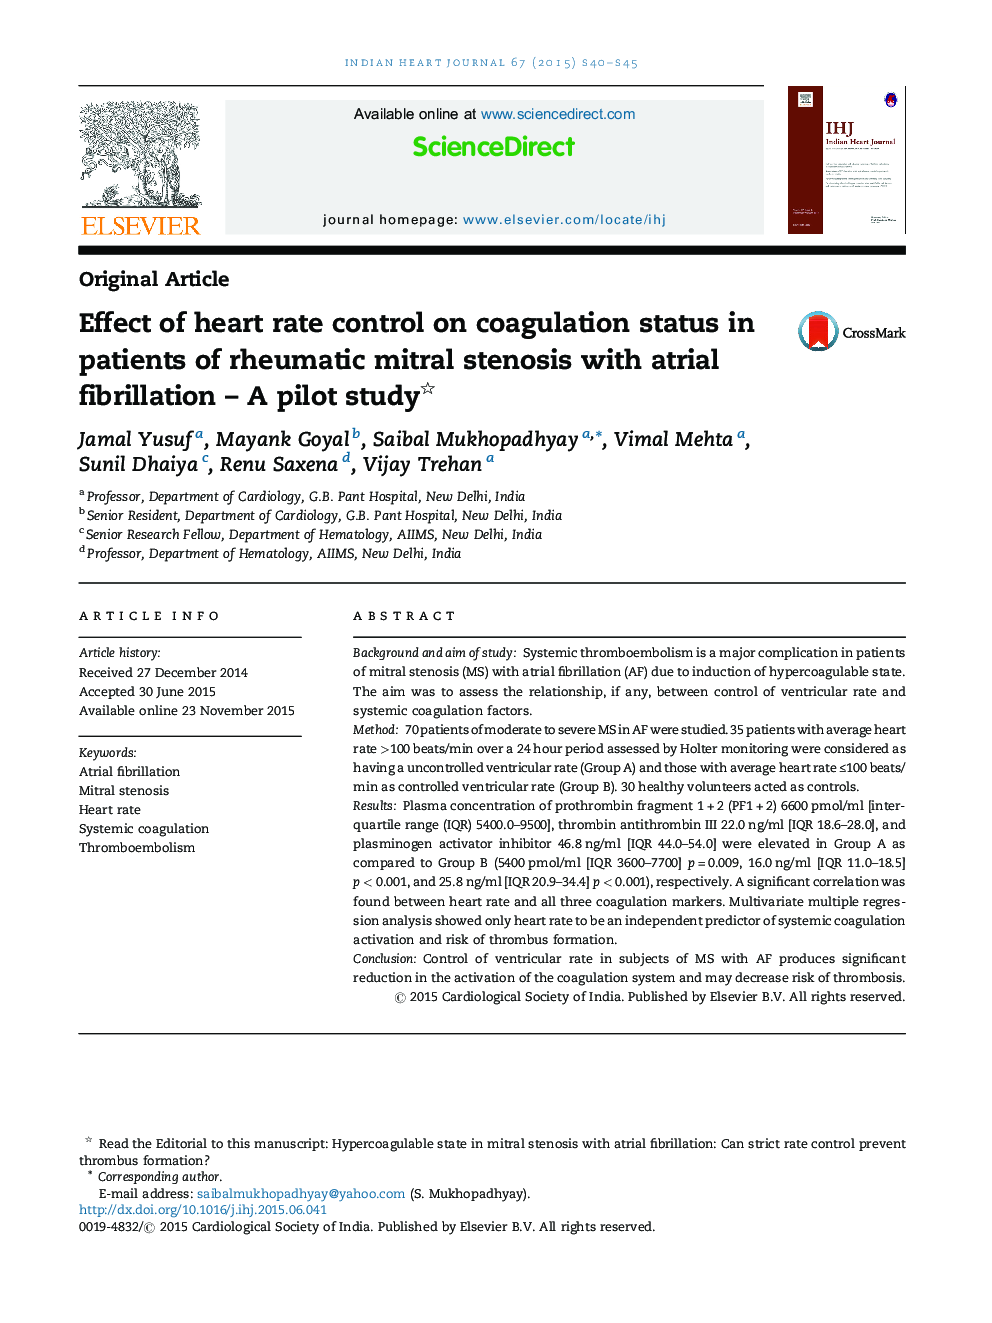 Effect of heart rate control on coagulation status in patients of rheumatic mitral stenosis with atrial fibrillation - A pilot study